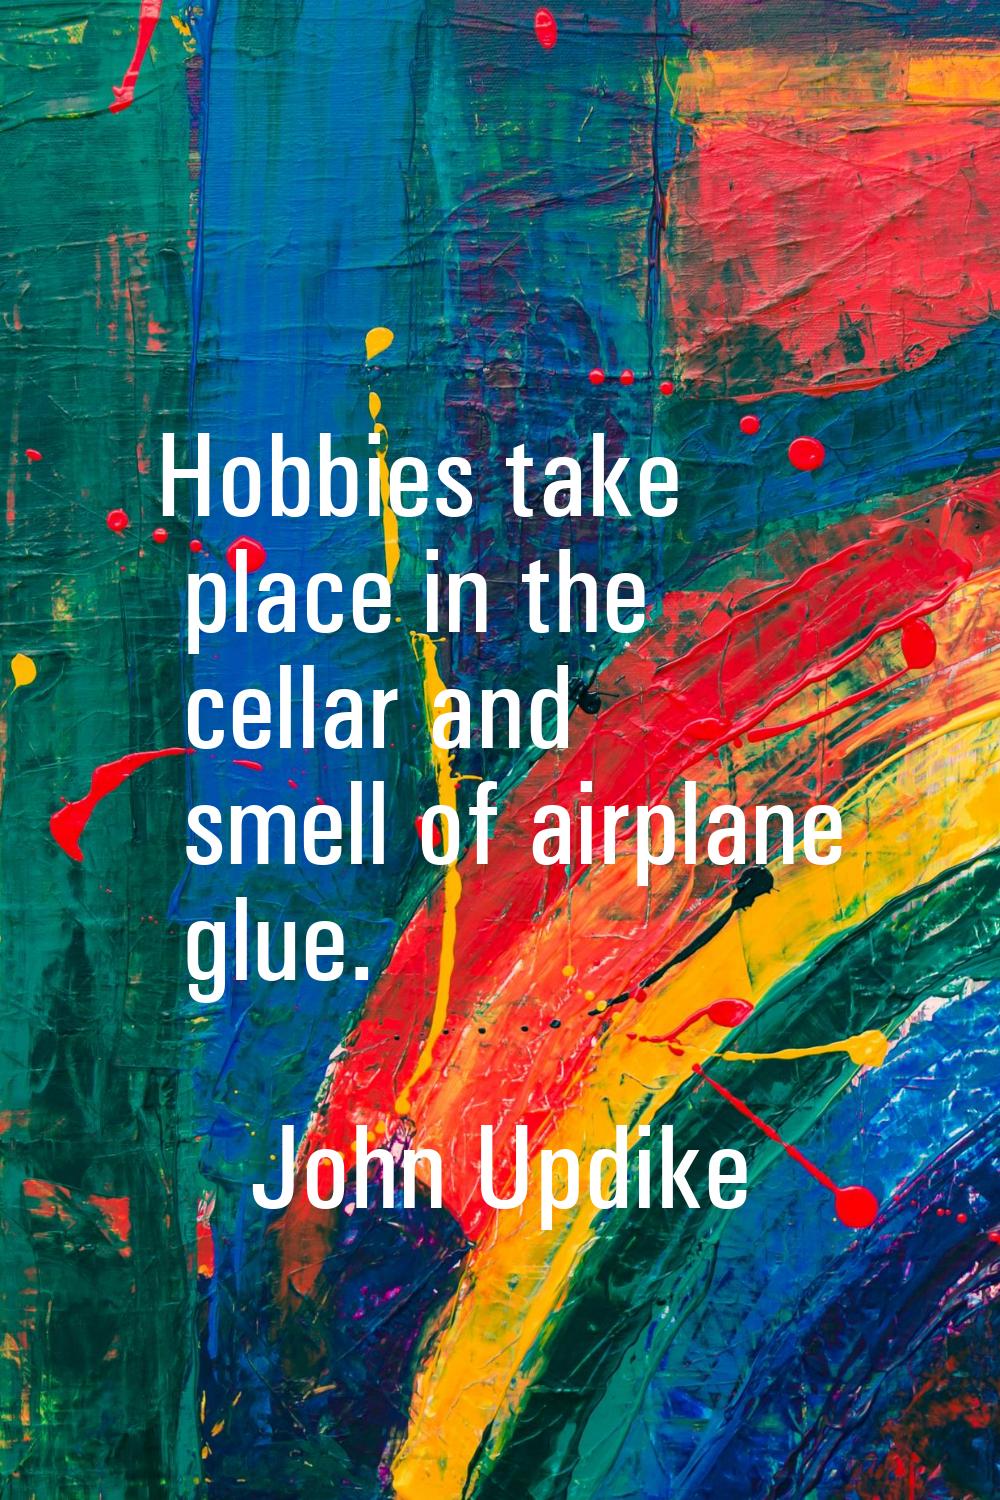 Hobbies take place in the cellar and smell of airplane glue.